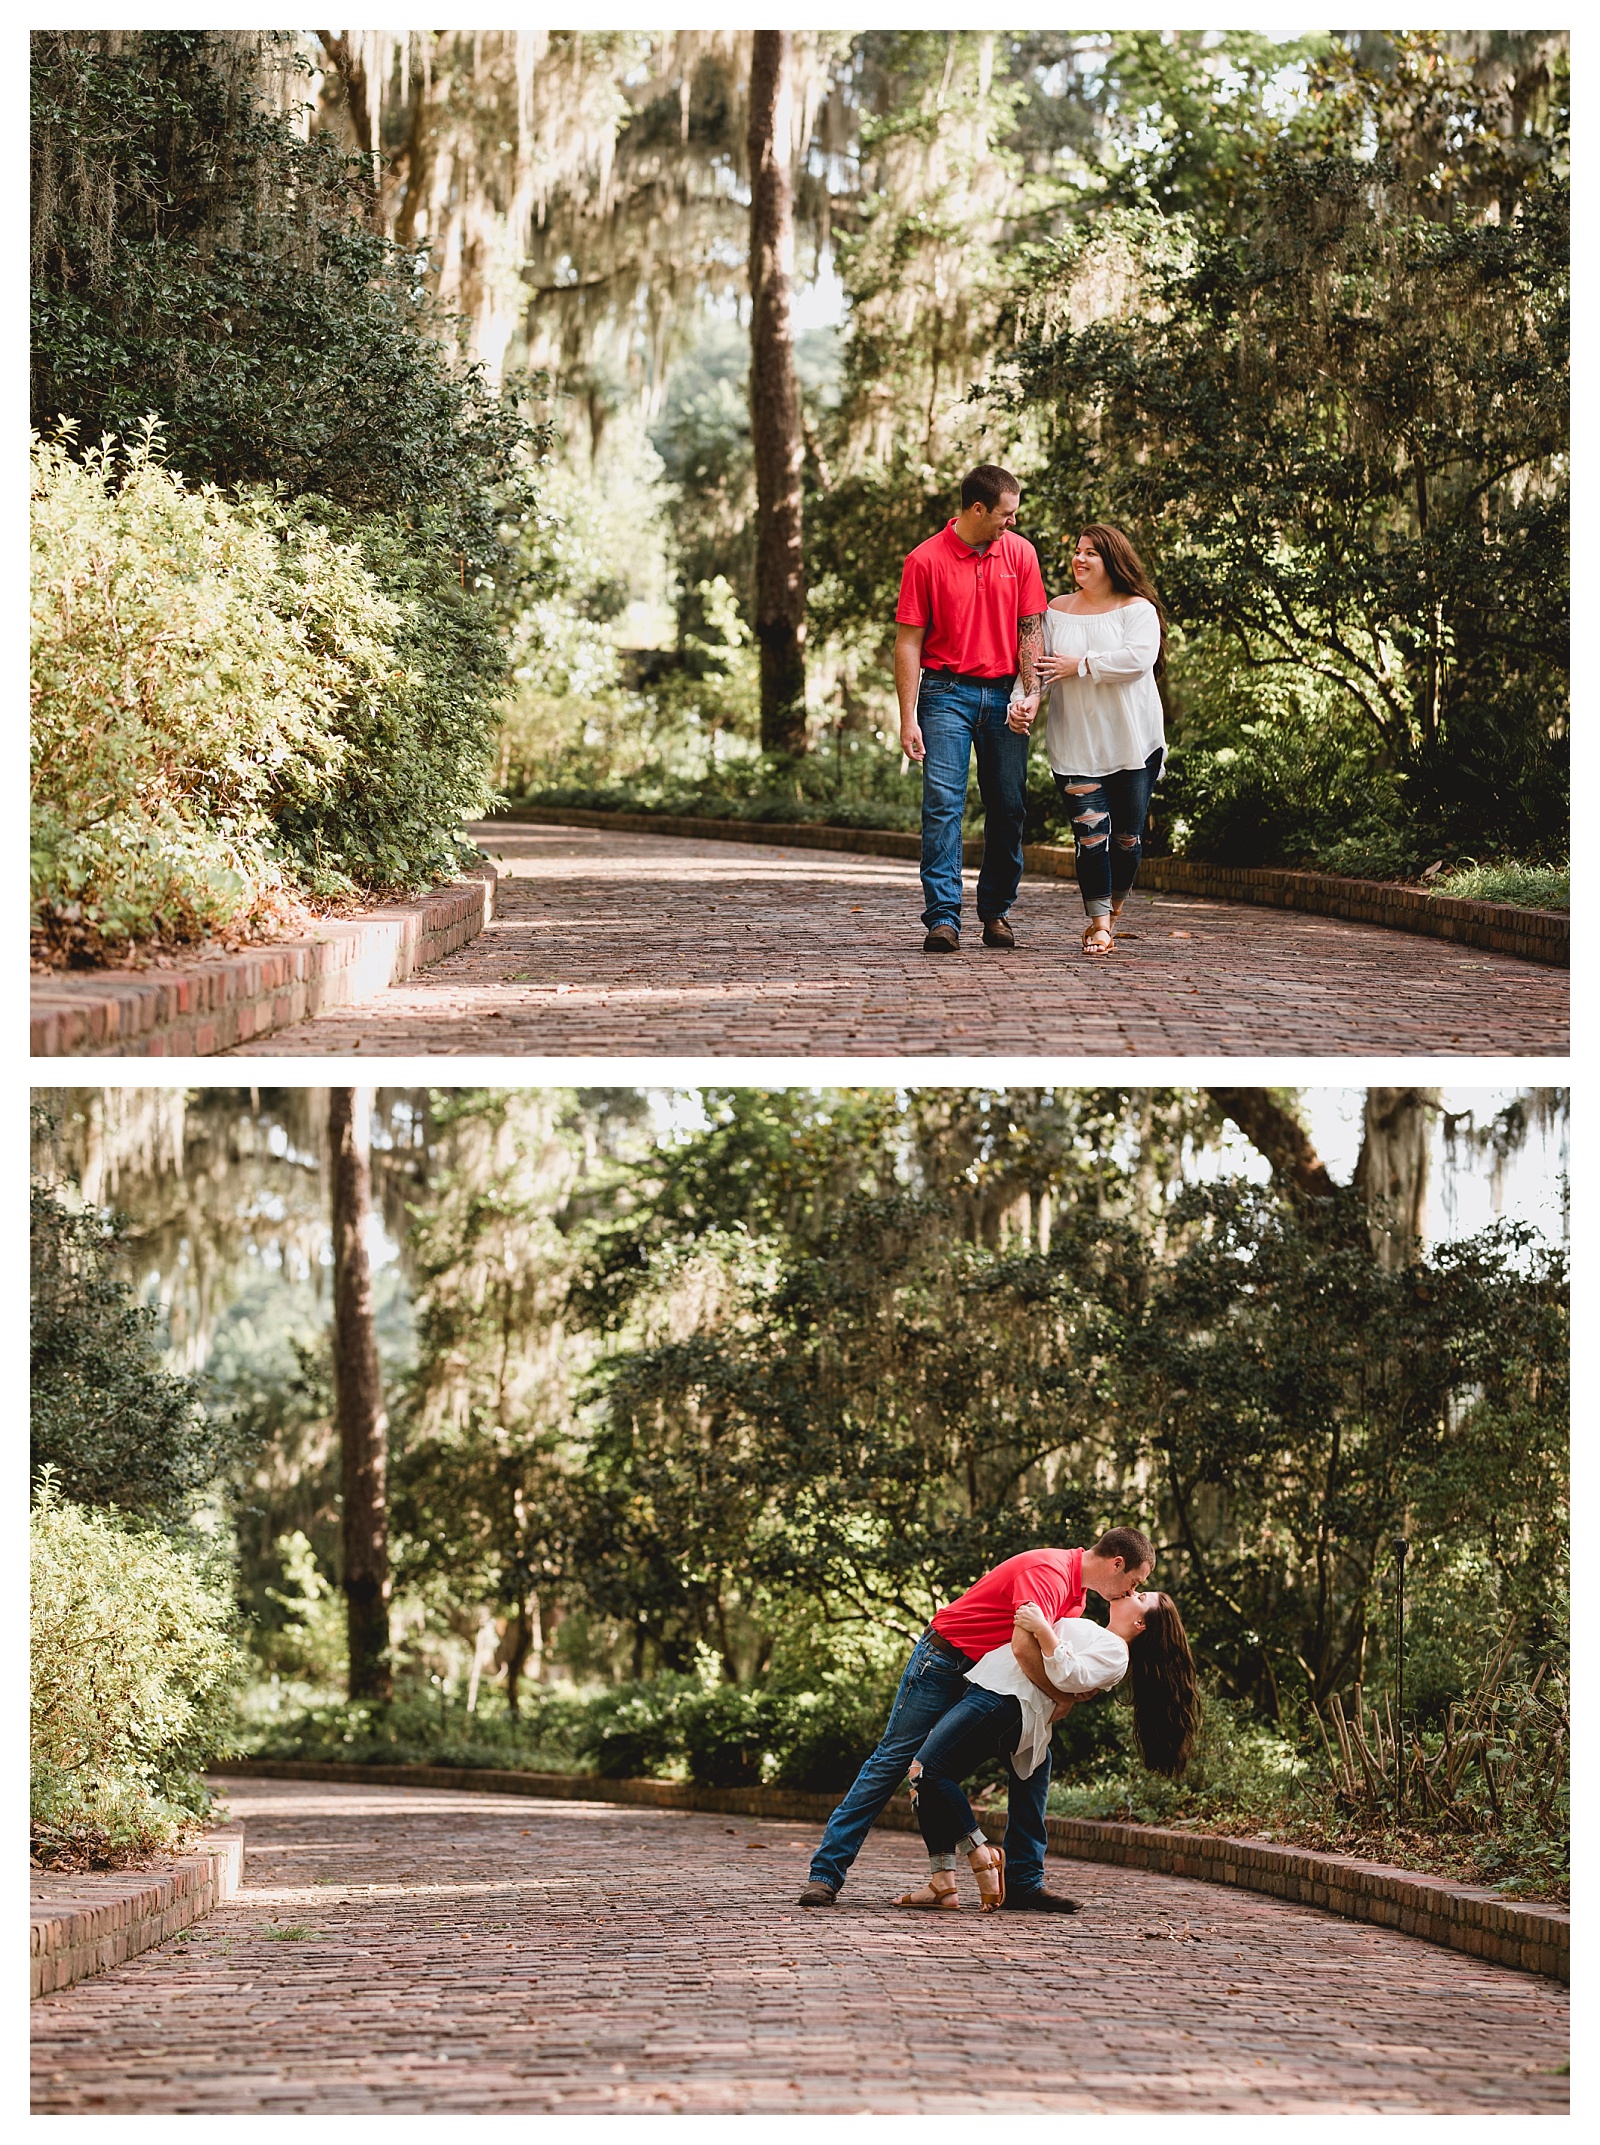 Engagement photos taken at Maclay Gardens in Northwest Florida. Shelly Williams Photography